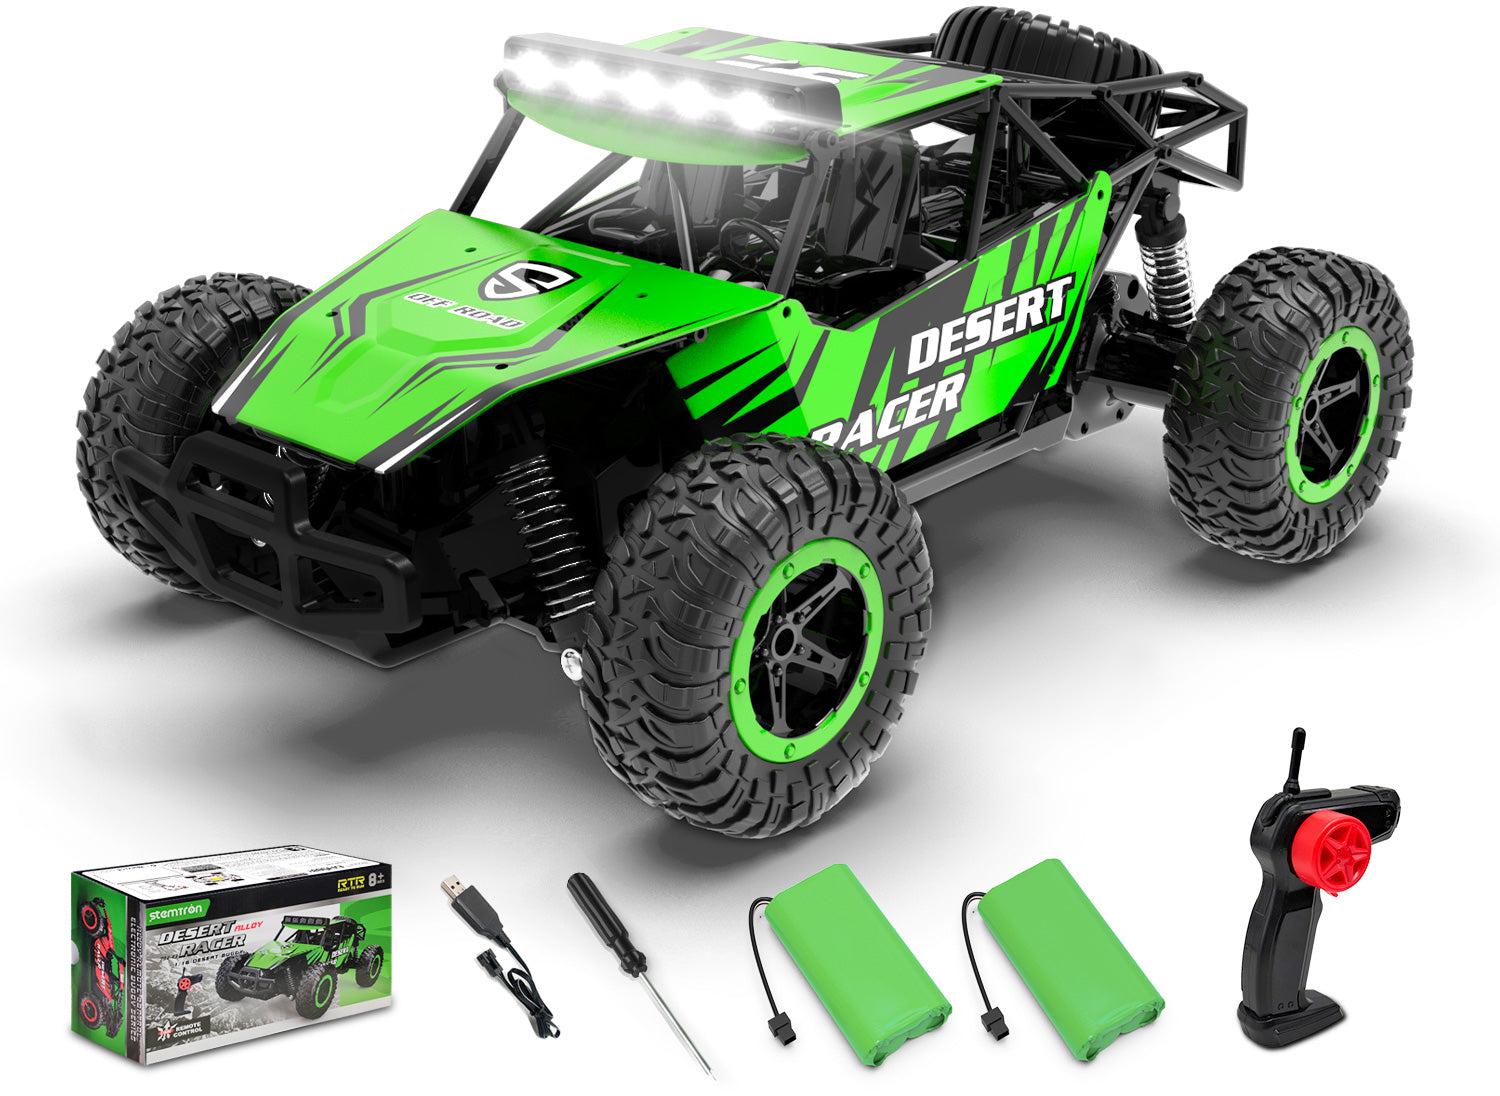 EXHOBBY 1/16 All Terrain Remote Control Car for Kids Off Road RC Truck Desert Racer Great Gift